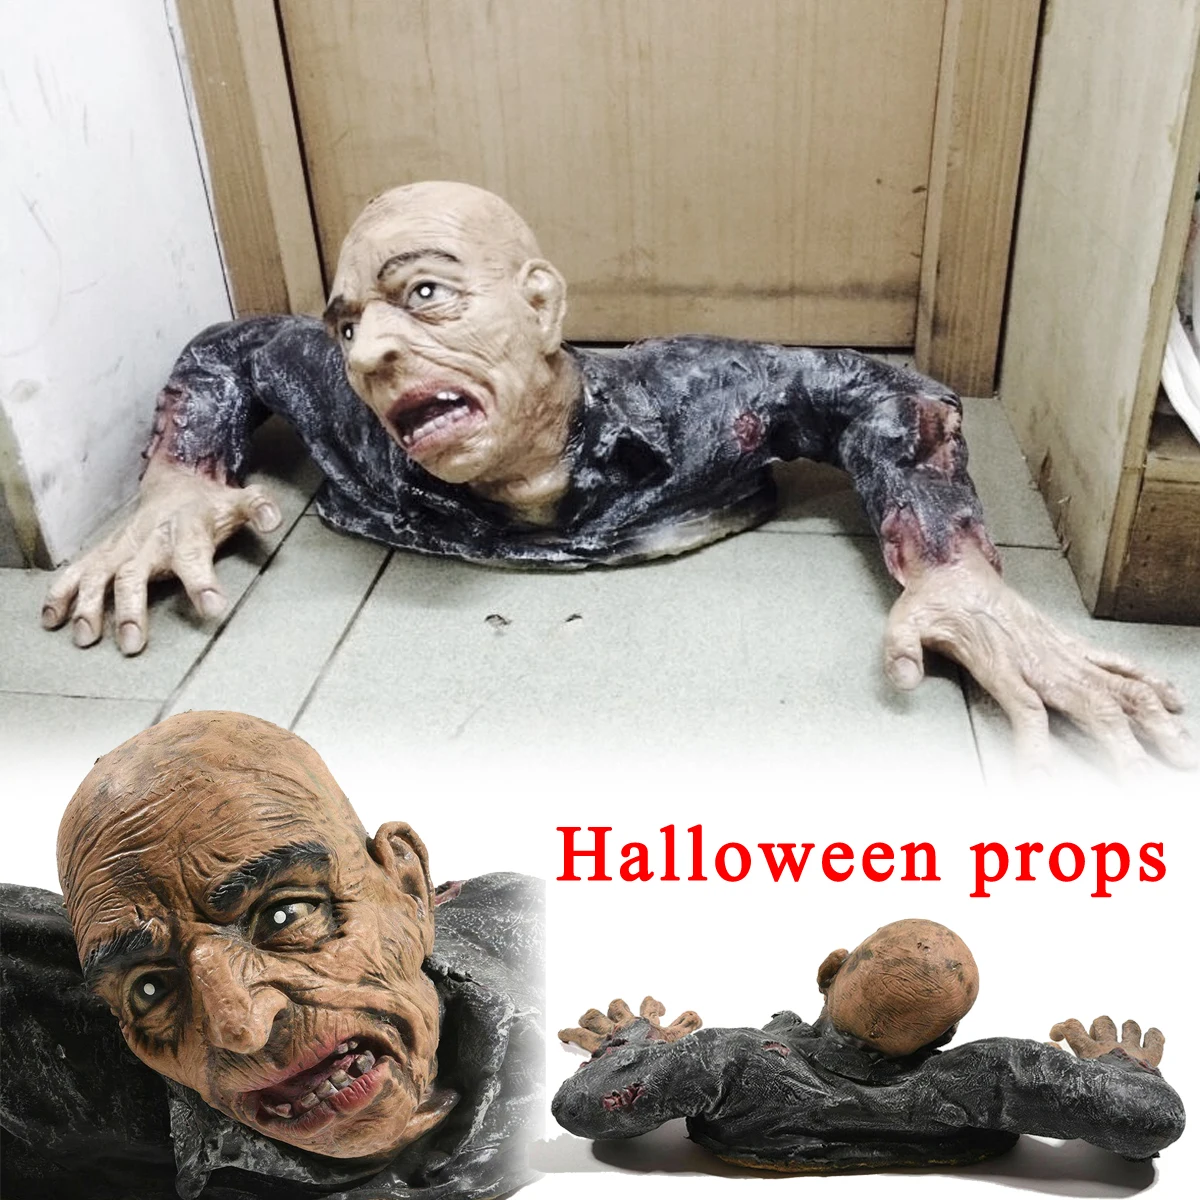 

Halloween Scary Haunted House Props Horror Layout Crawling Body Creepy Little Corpse Zombie Ghost Home Bar Halloween Party Decor